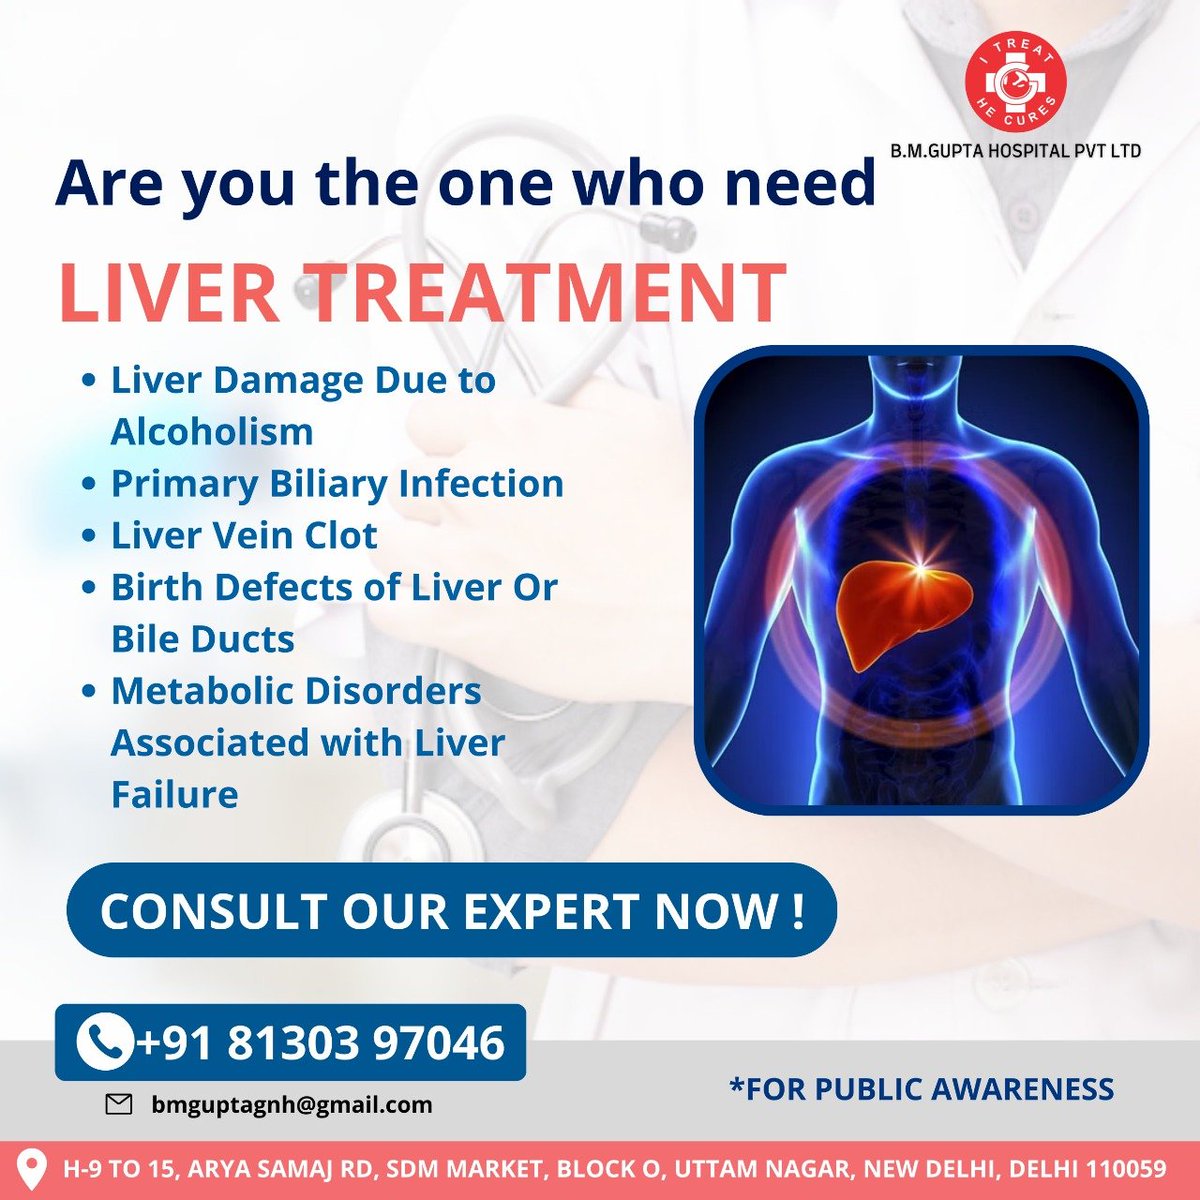 Are you the one who needs Liver Treatment
For more info
Call us at 011 4715 7777 and +91 81303 97046
Mail us: bmguptagnh@gmail.com
B.M. Gupta Hospital Pvt Ltd

#BMGH #BMGuptaHospital #health #healthcare #IBD #healthcare #livertransplant #liverproblems #liverdamage #liverhealth